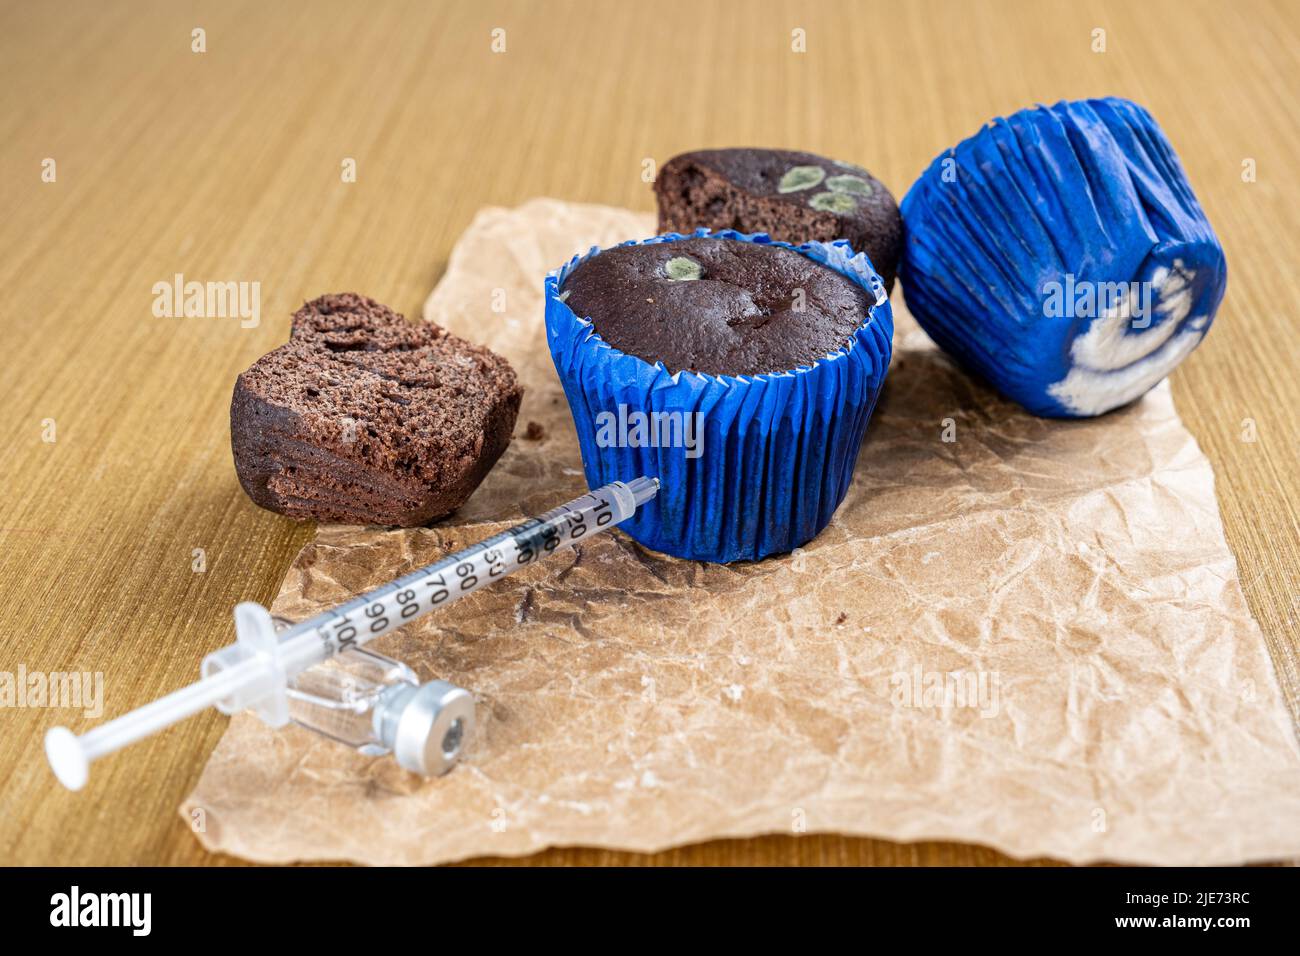 Closeup of syringe injecting insulin into moldy chocolate muffin. Stock Photo